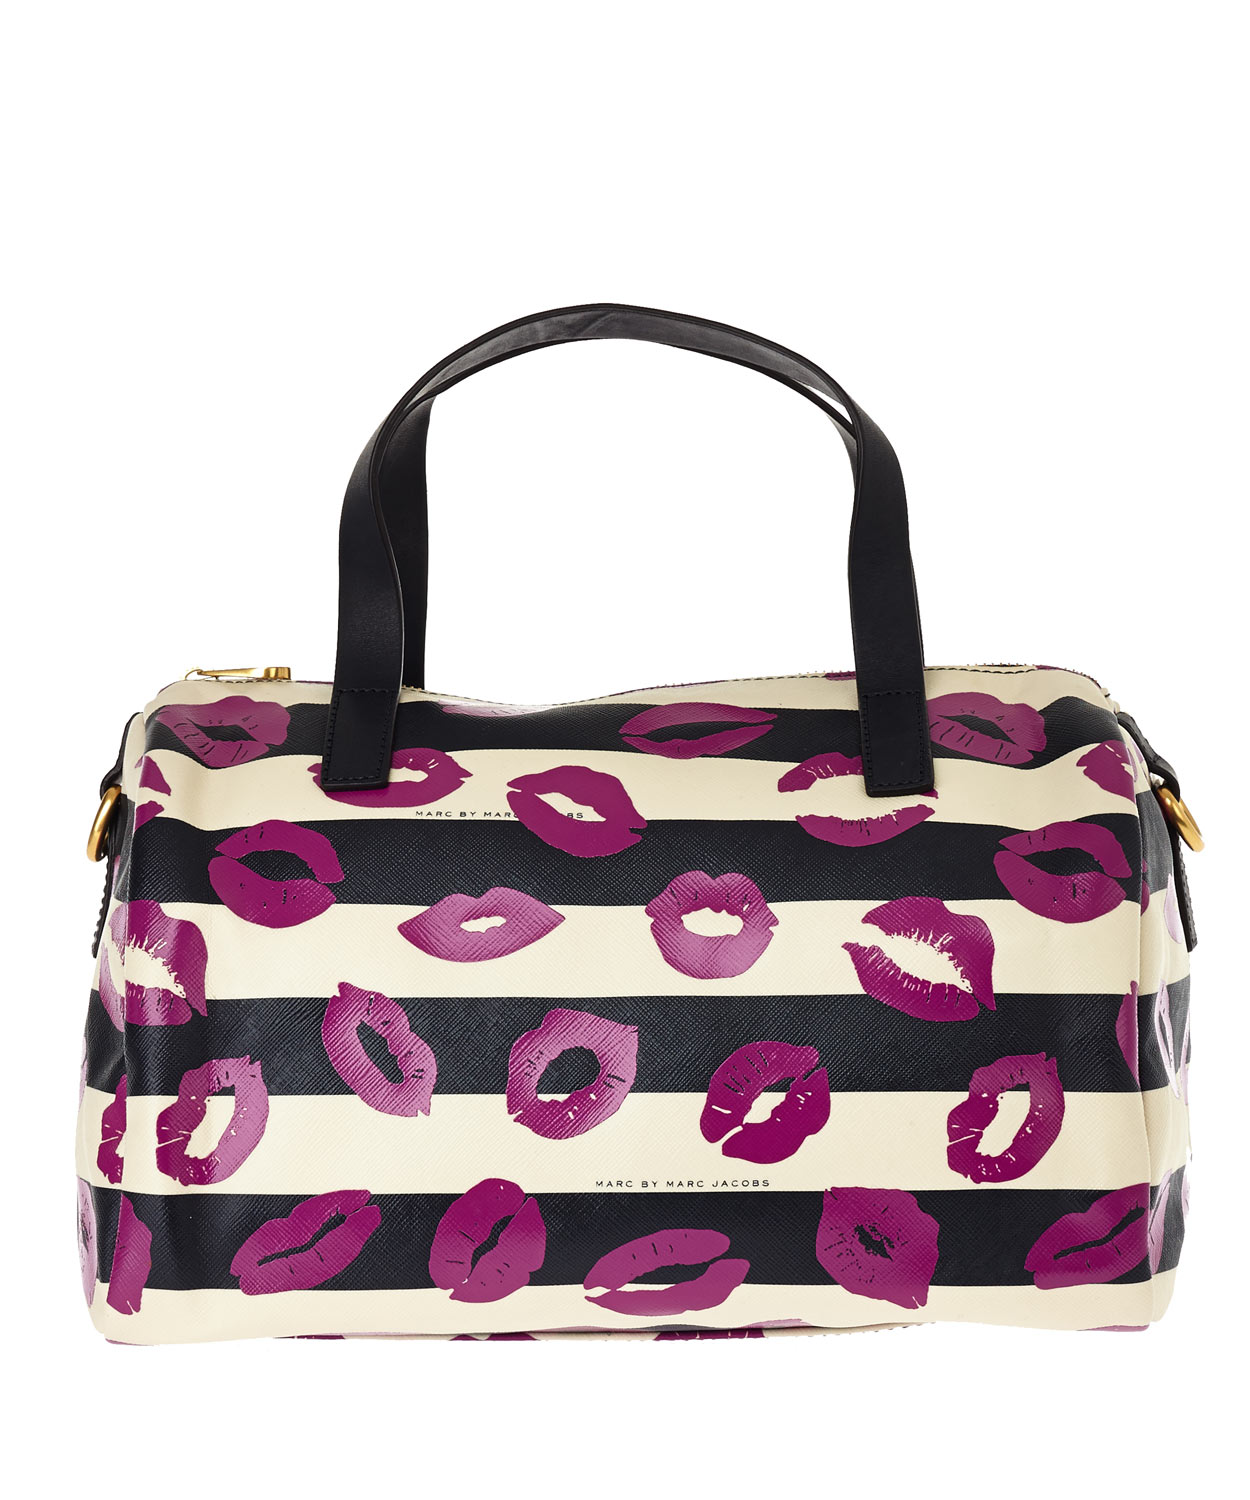 Lyst - Marc By Marc Jacobs Navy Eazy Lips Print Bowling Bag in Purple